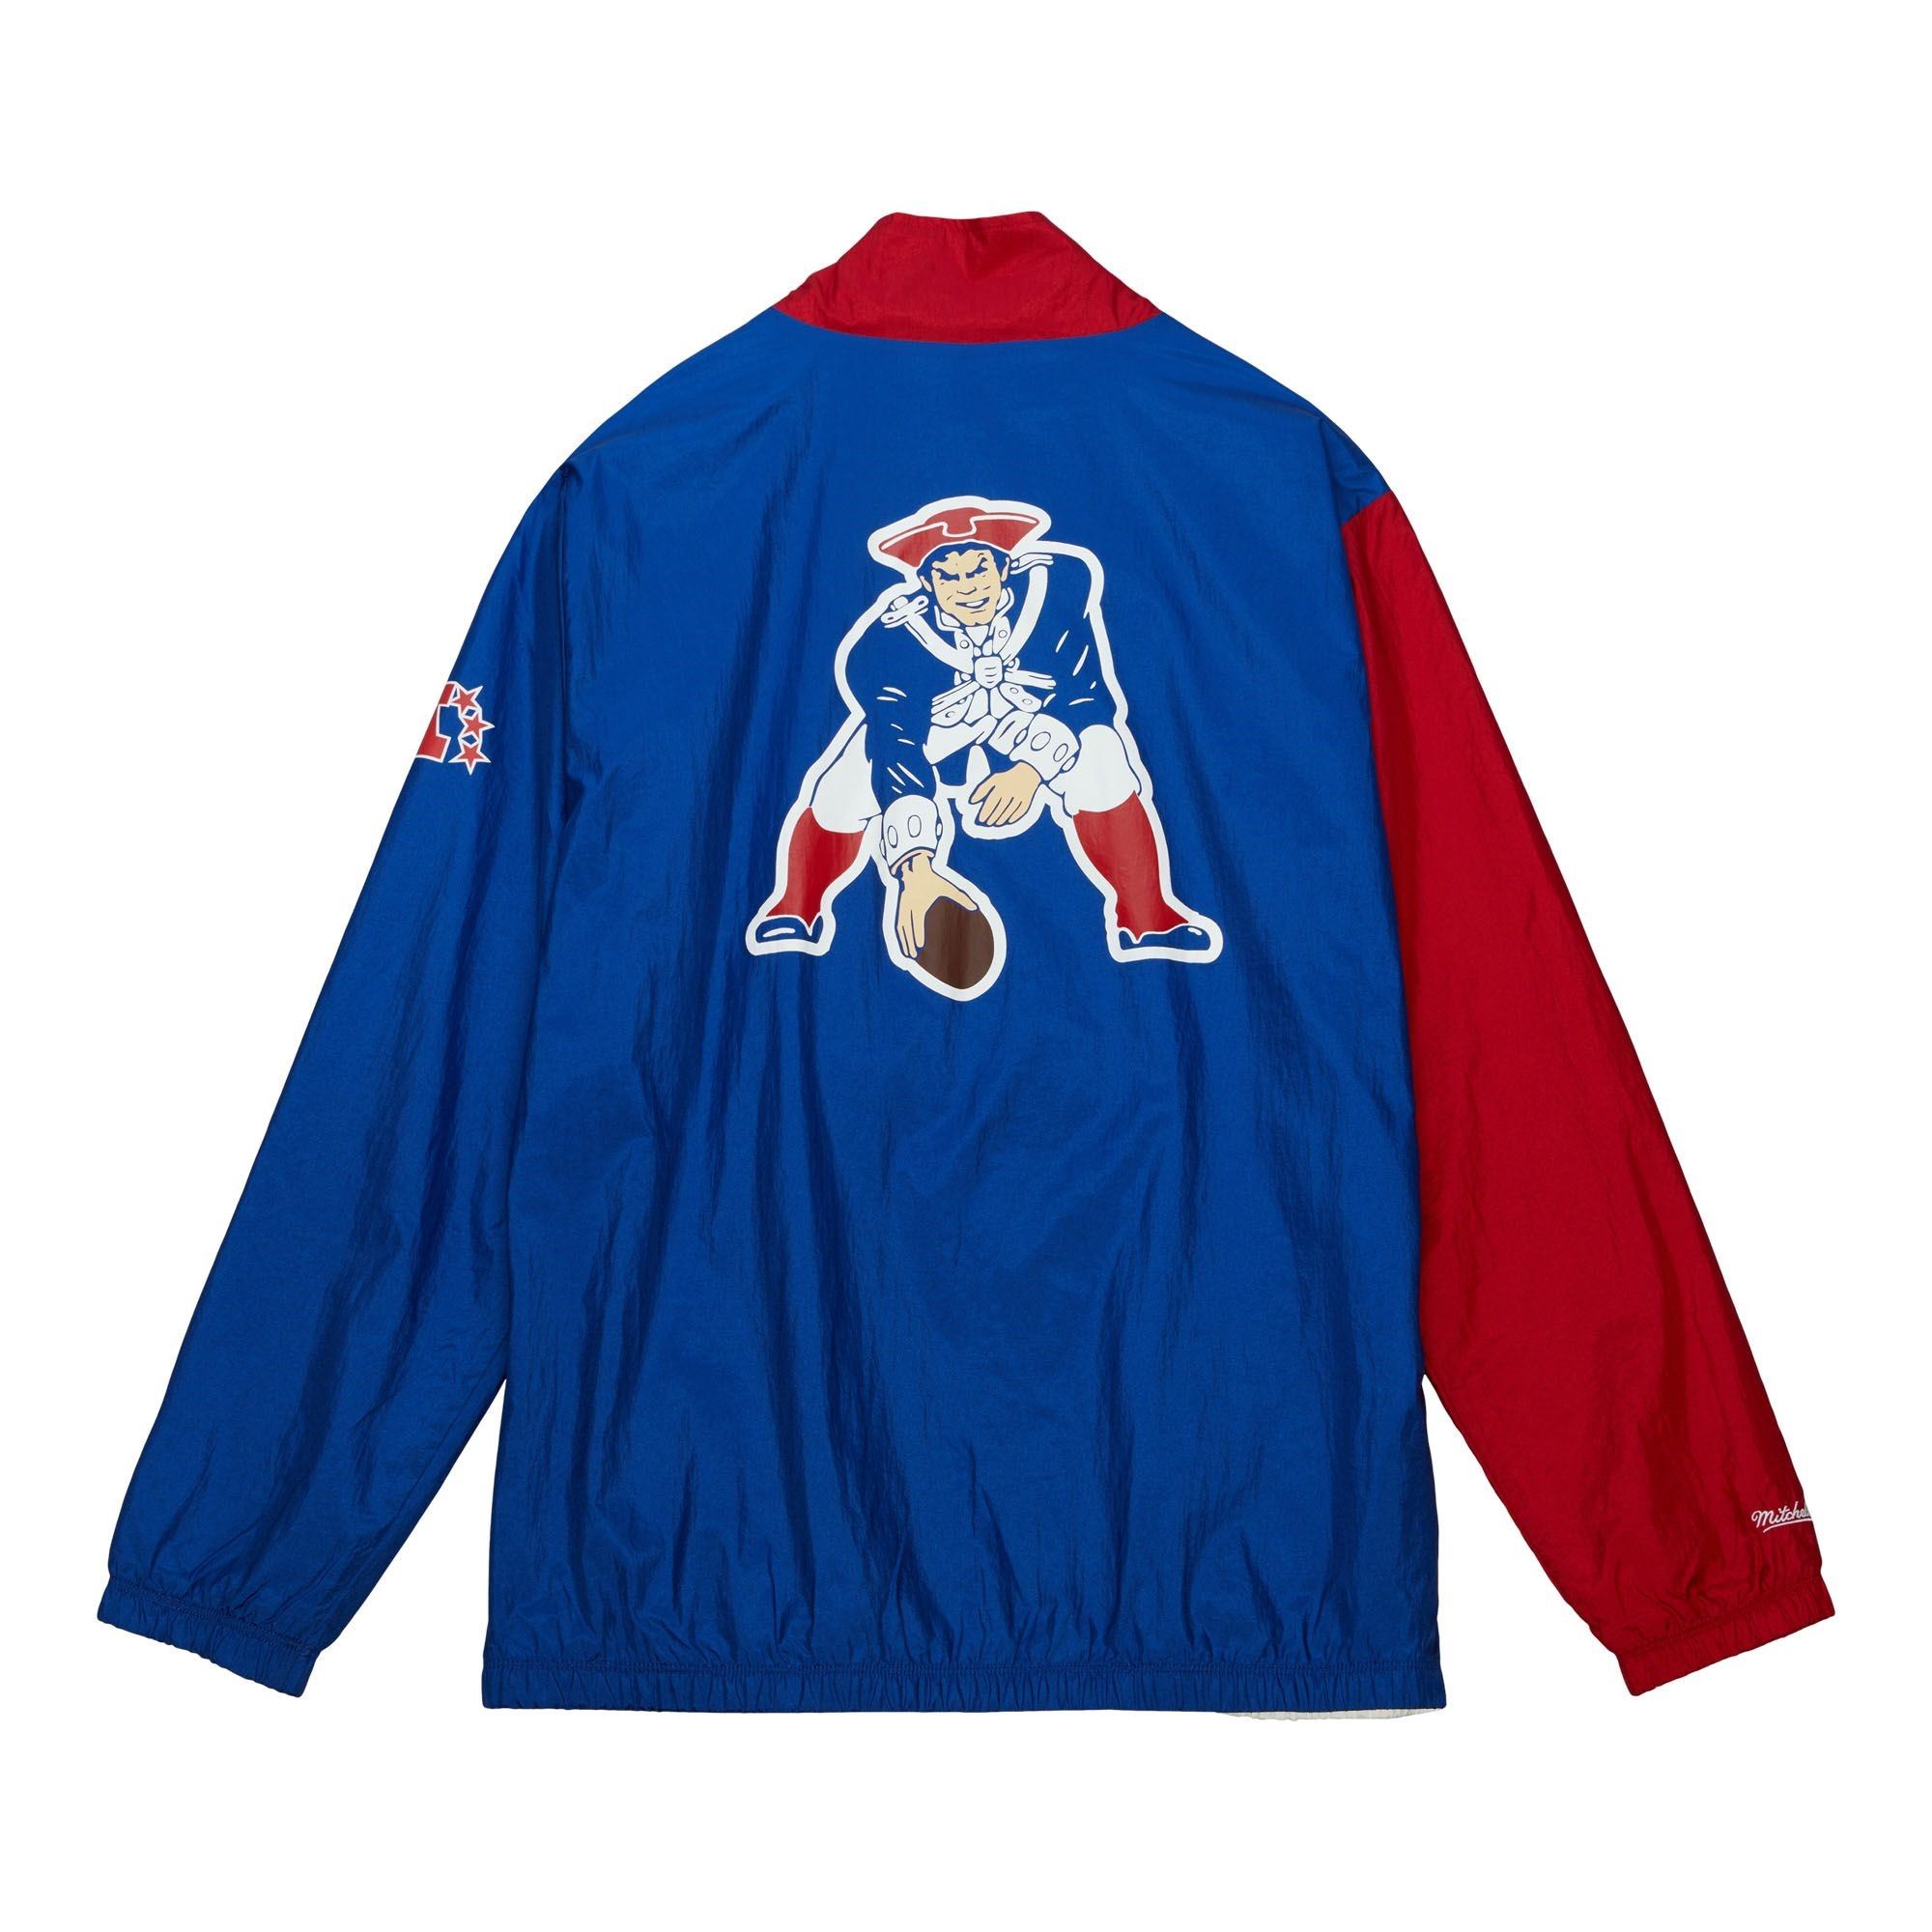 New England Patriots NFL Arched Retro Lined Windbreaker Blue Red Jacke Mitchell & Ness